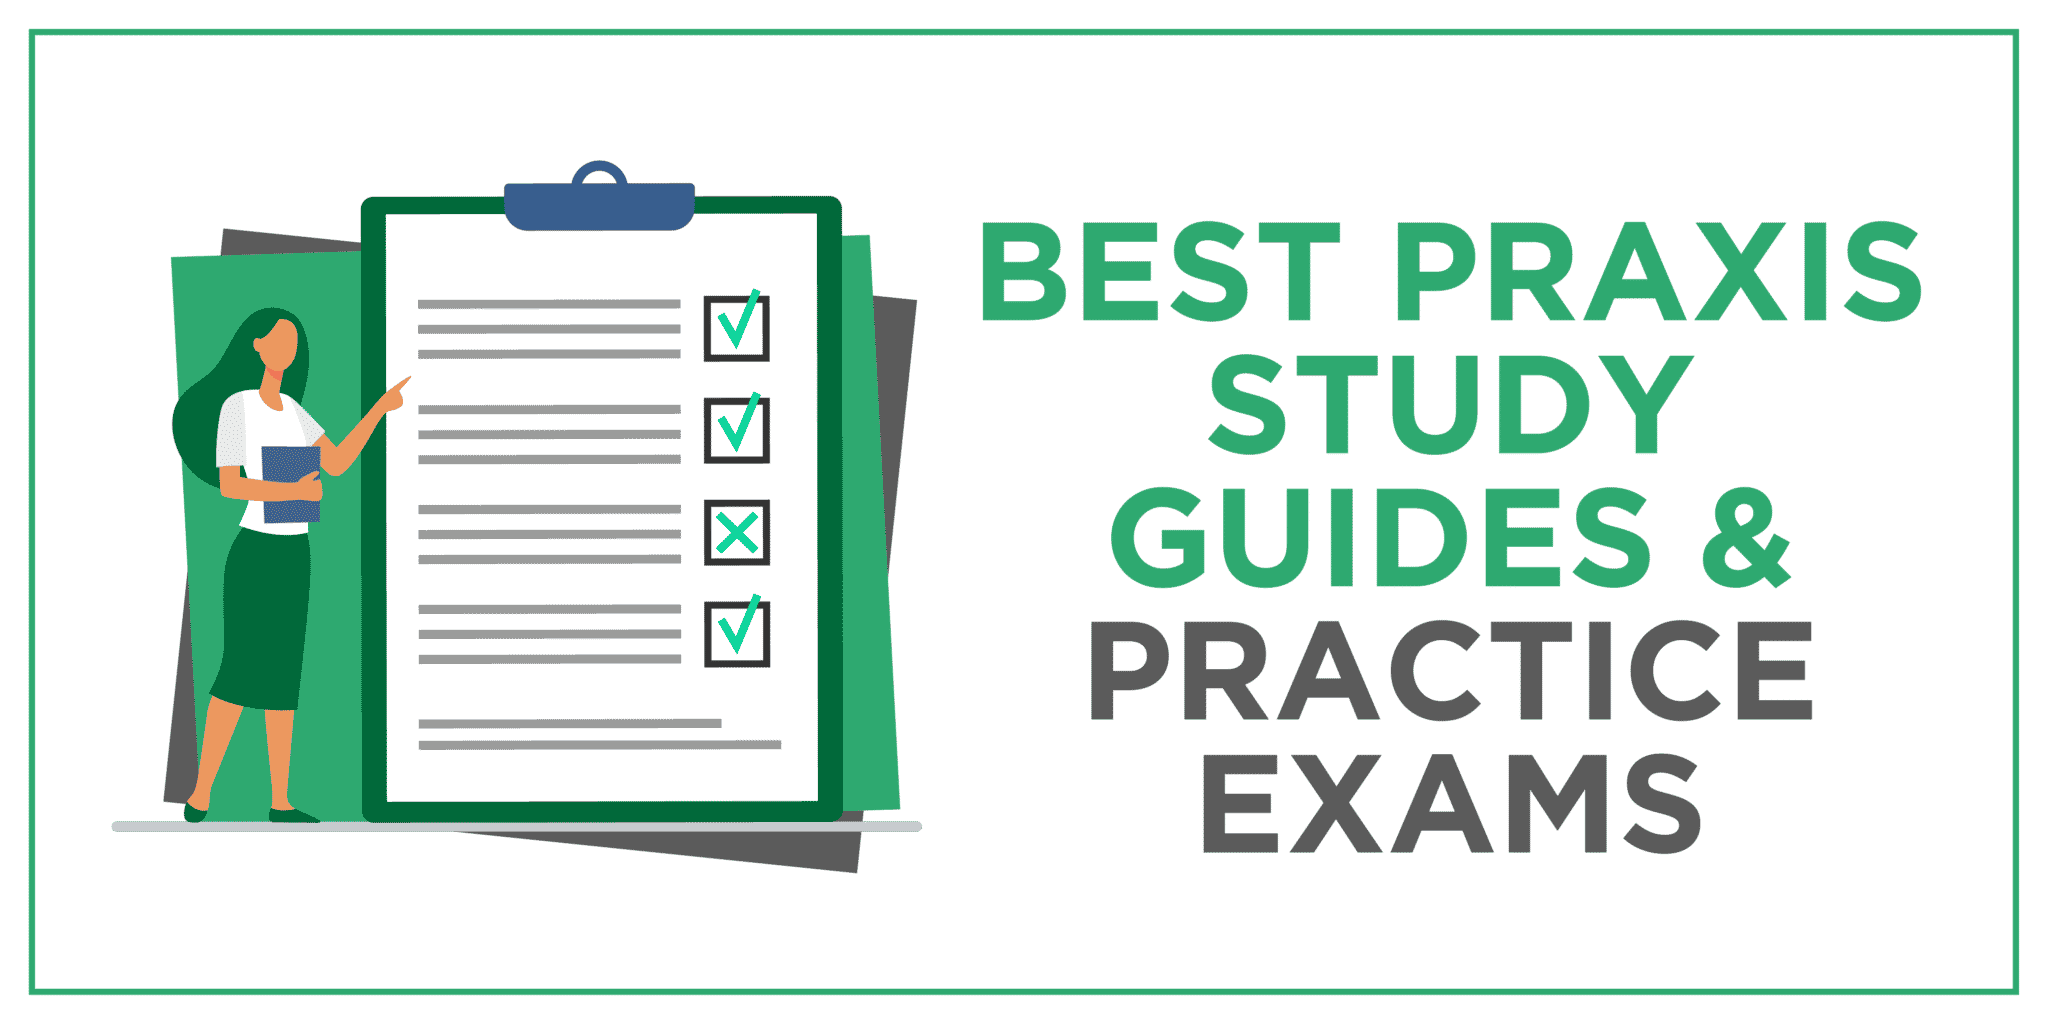 Best Praxis Study Guides and Practice Exams